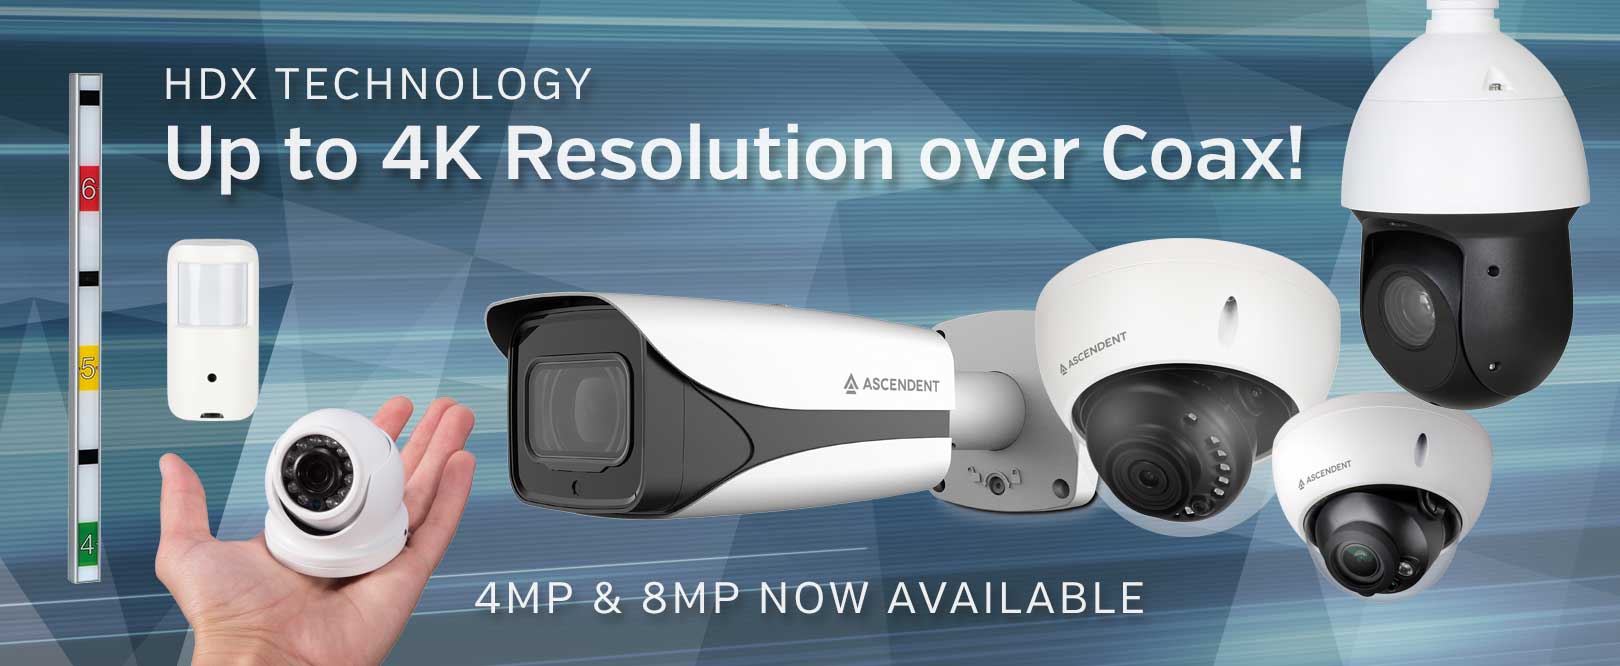 HDX Technology - Up to 4K Resolution over Coax! 4MP & 8MP Now Available